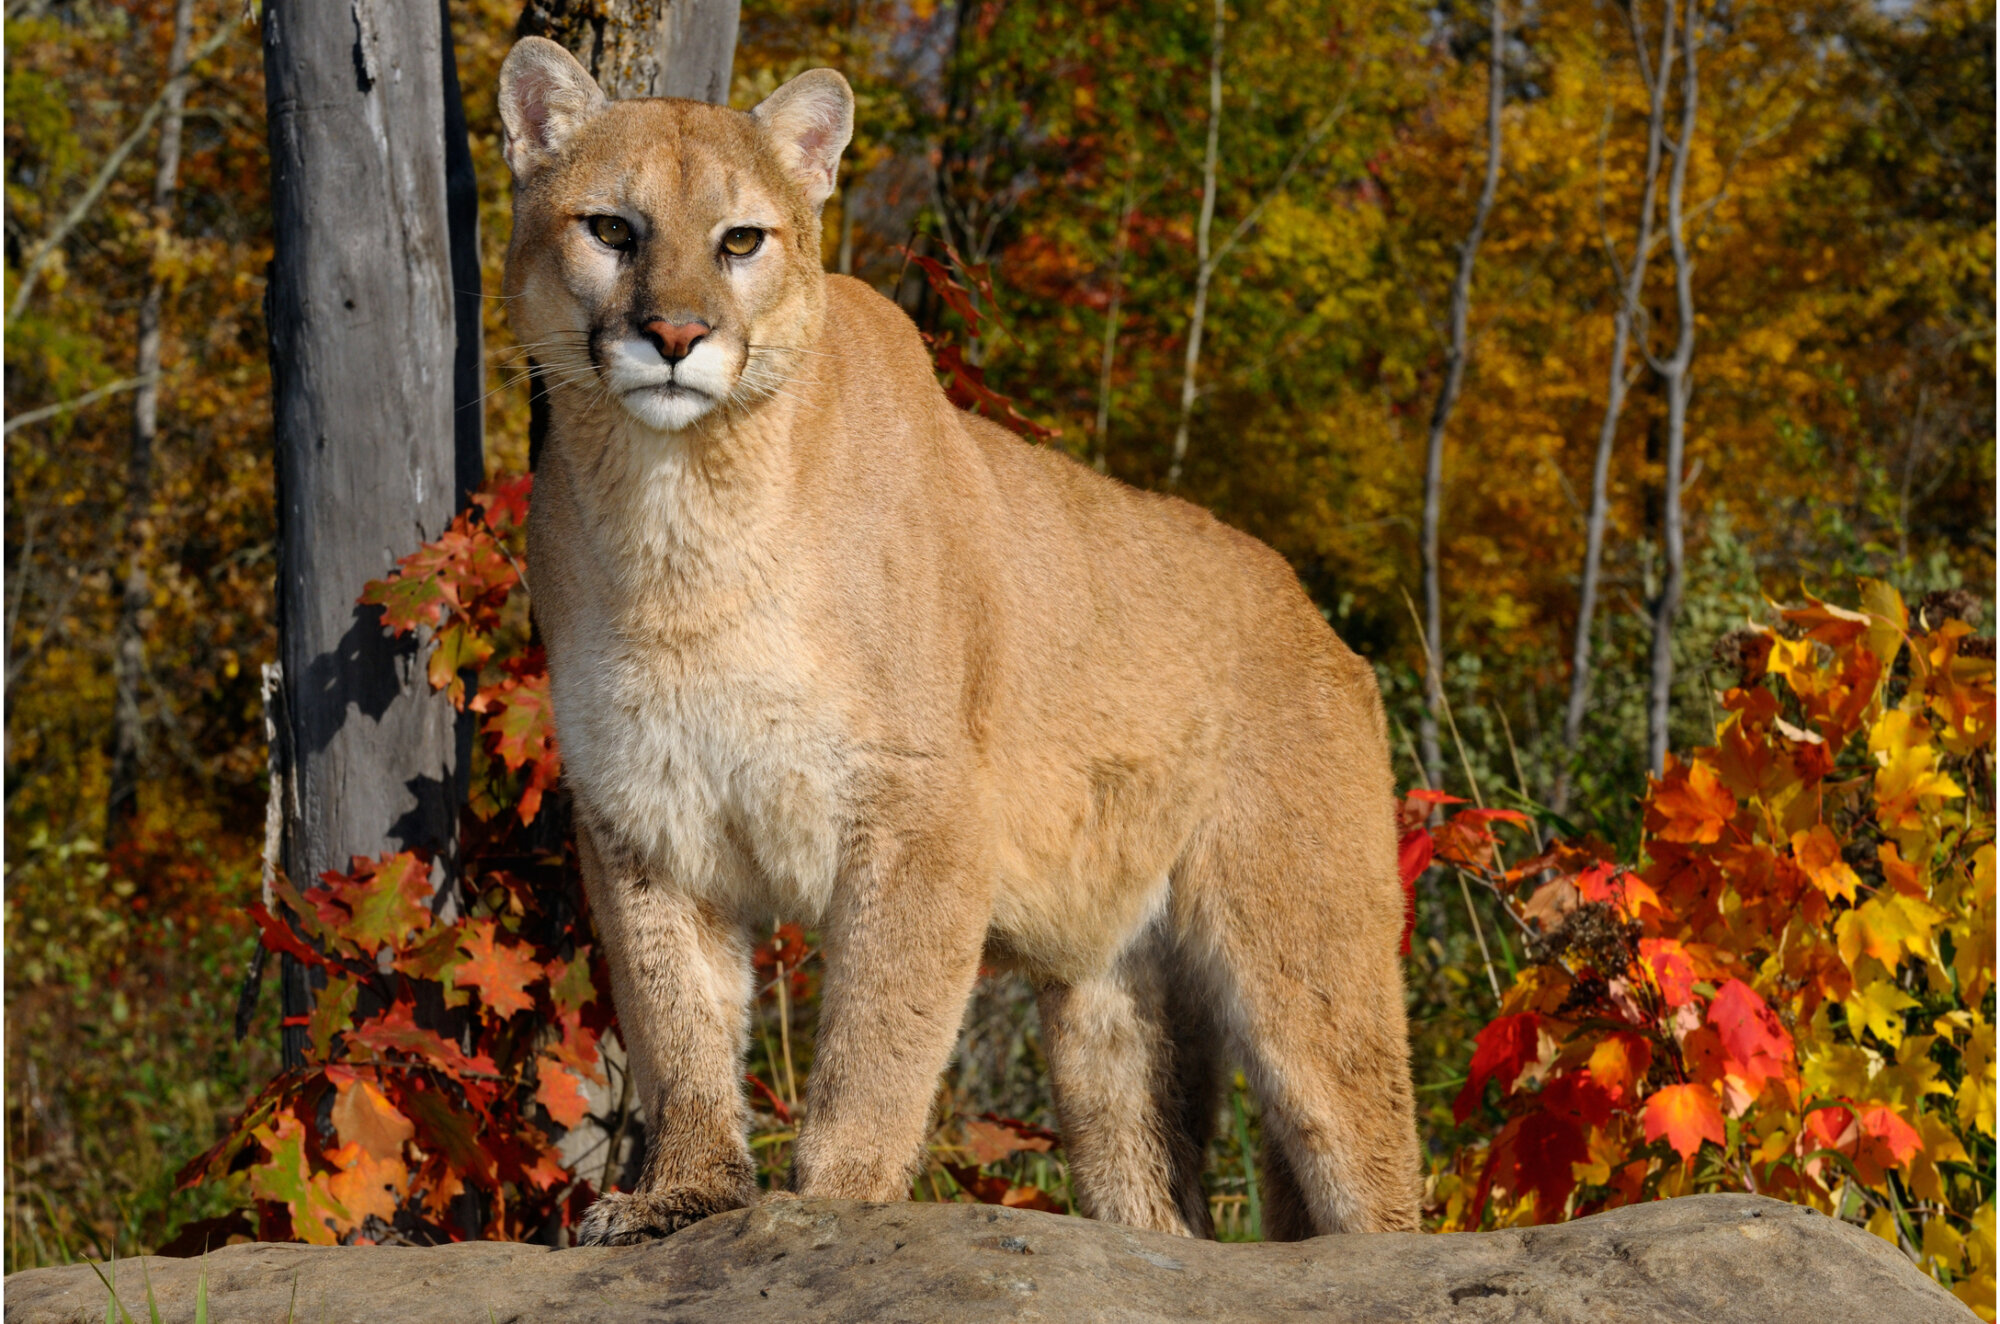 Cougar staring while standing on a rock in an Autumn forest with red oak and maple leaves